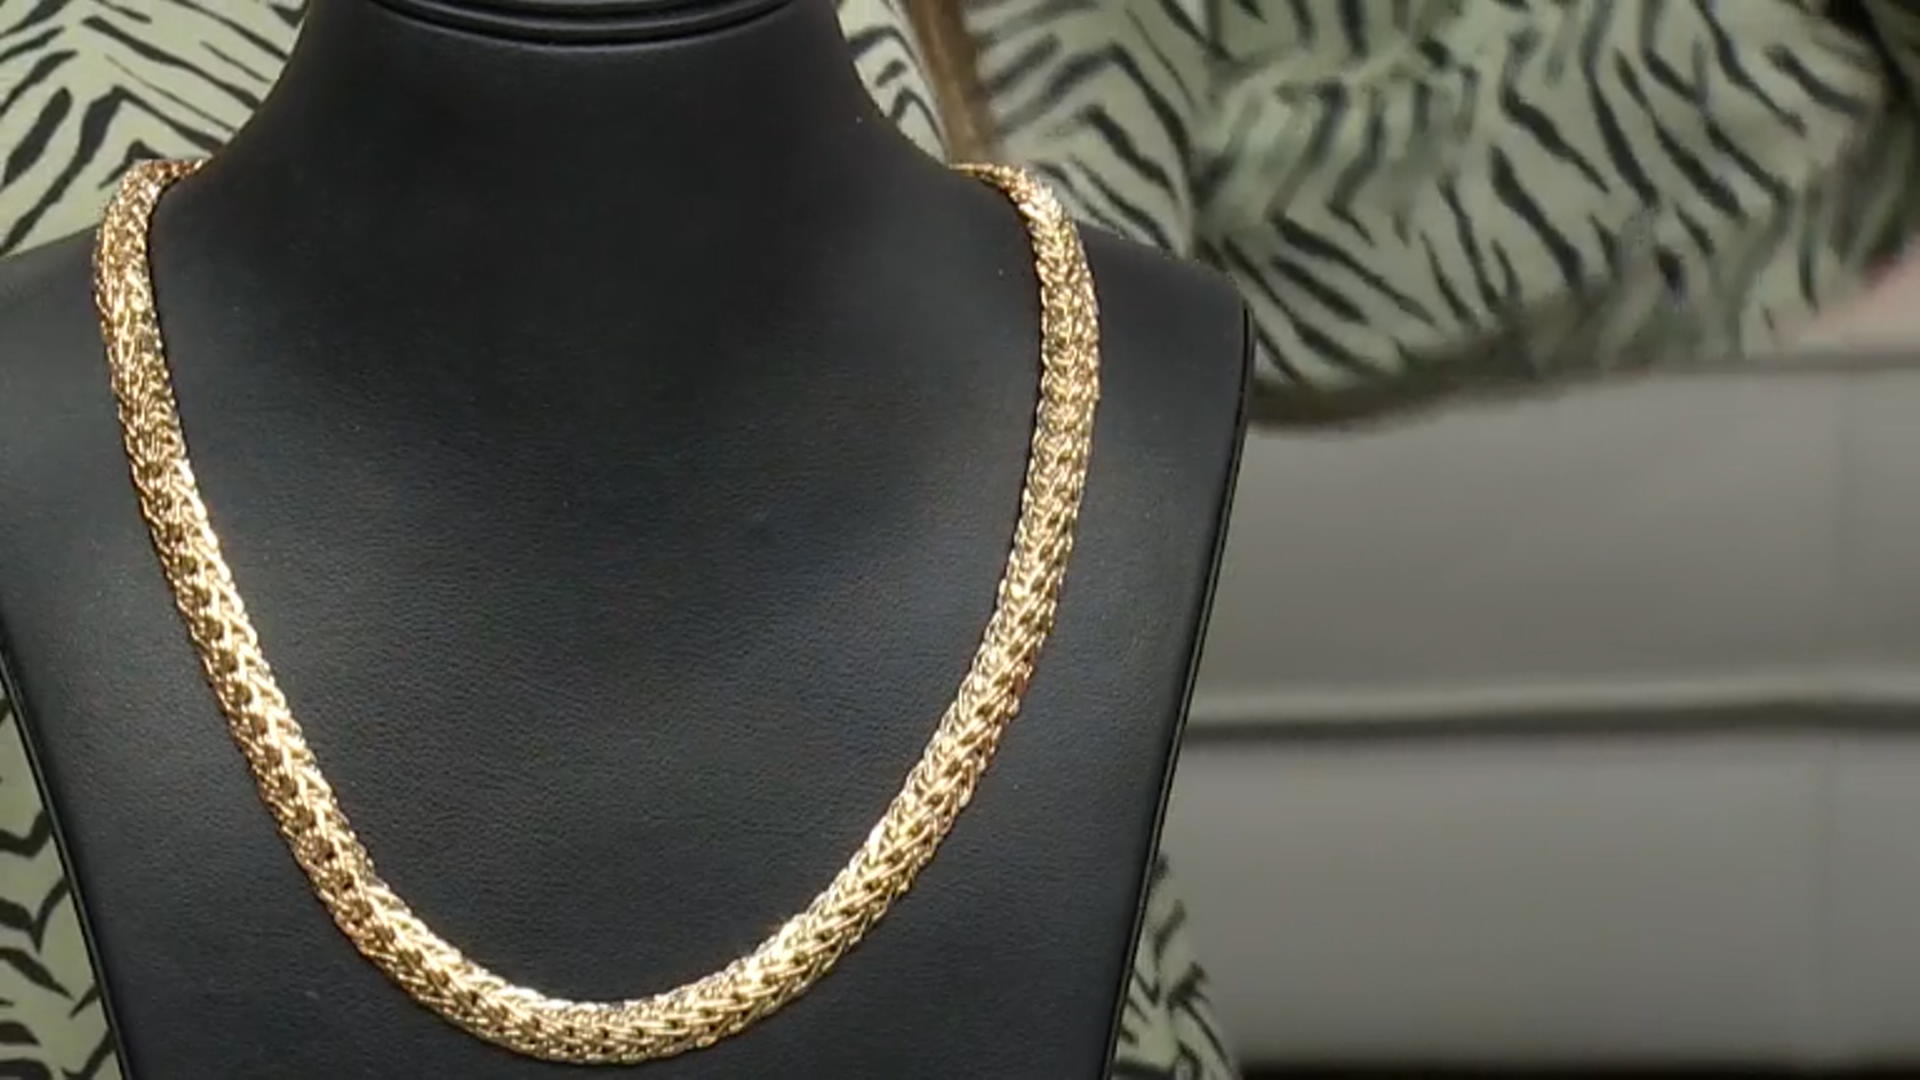 10K Yellow Gold High Polished Woven Chain